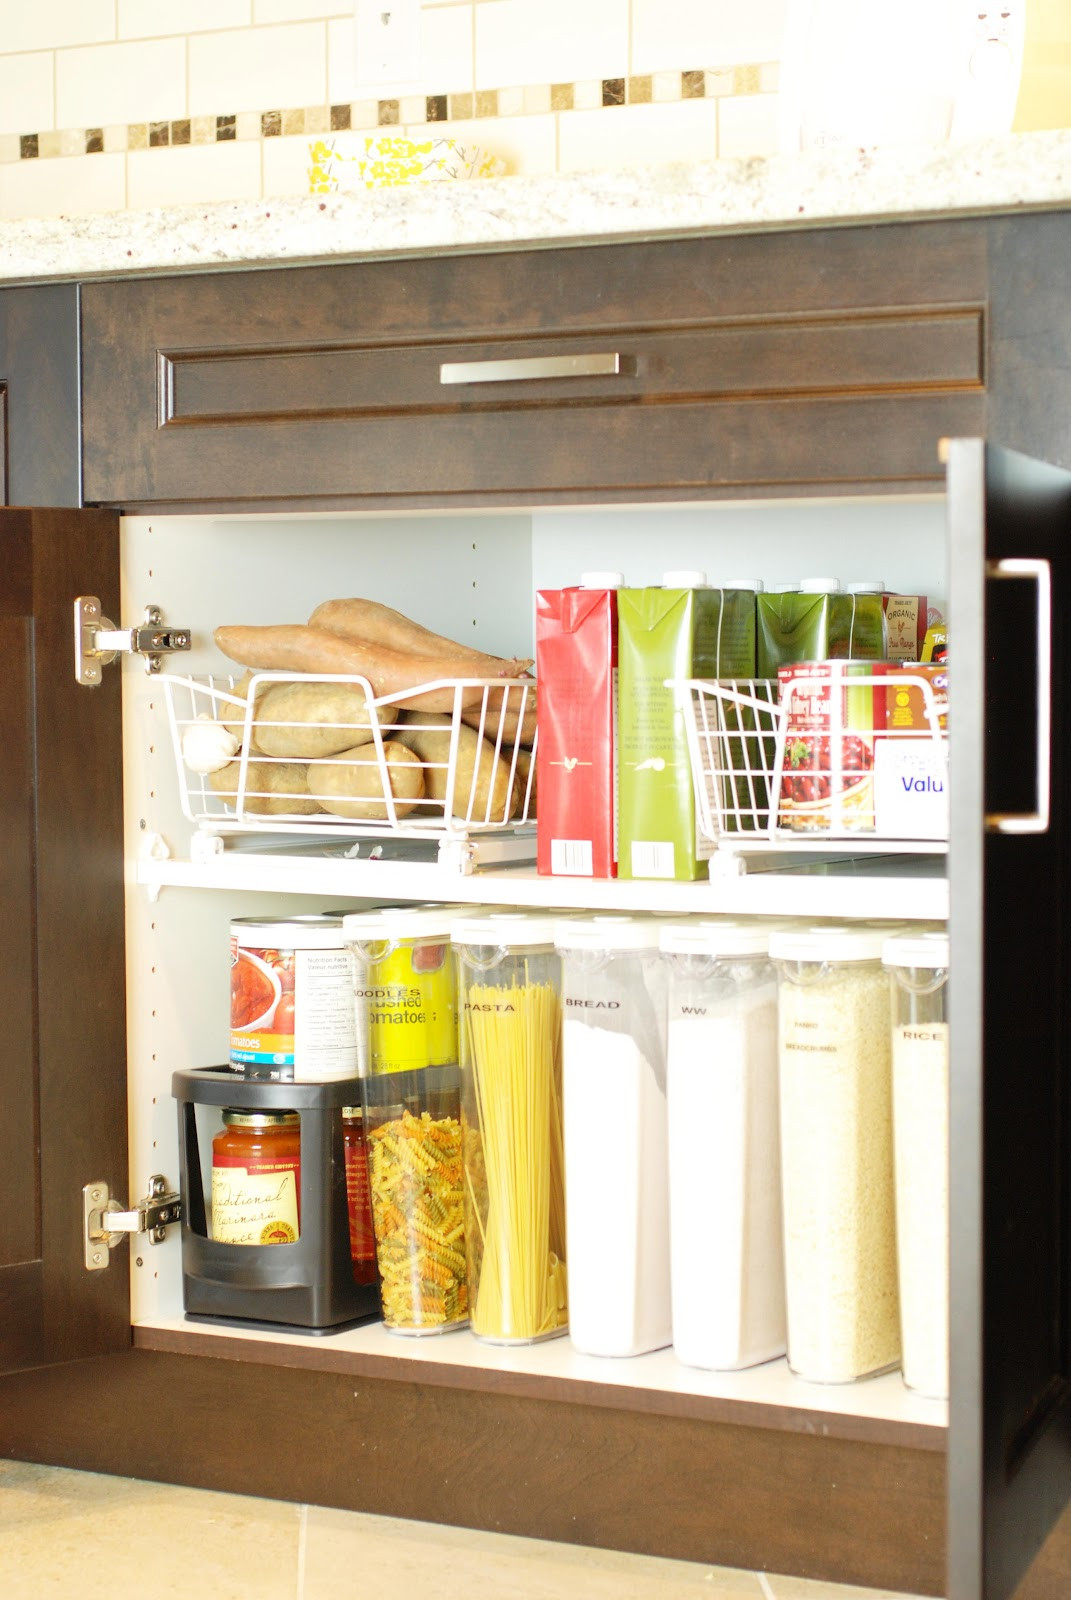 Kitchen Cabinet Organizers Lowes
 Most Popular 39 Lowe S Kitchen Cabinets Pantry Storage